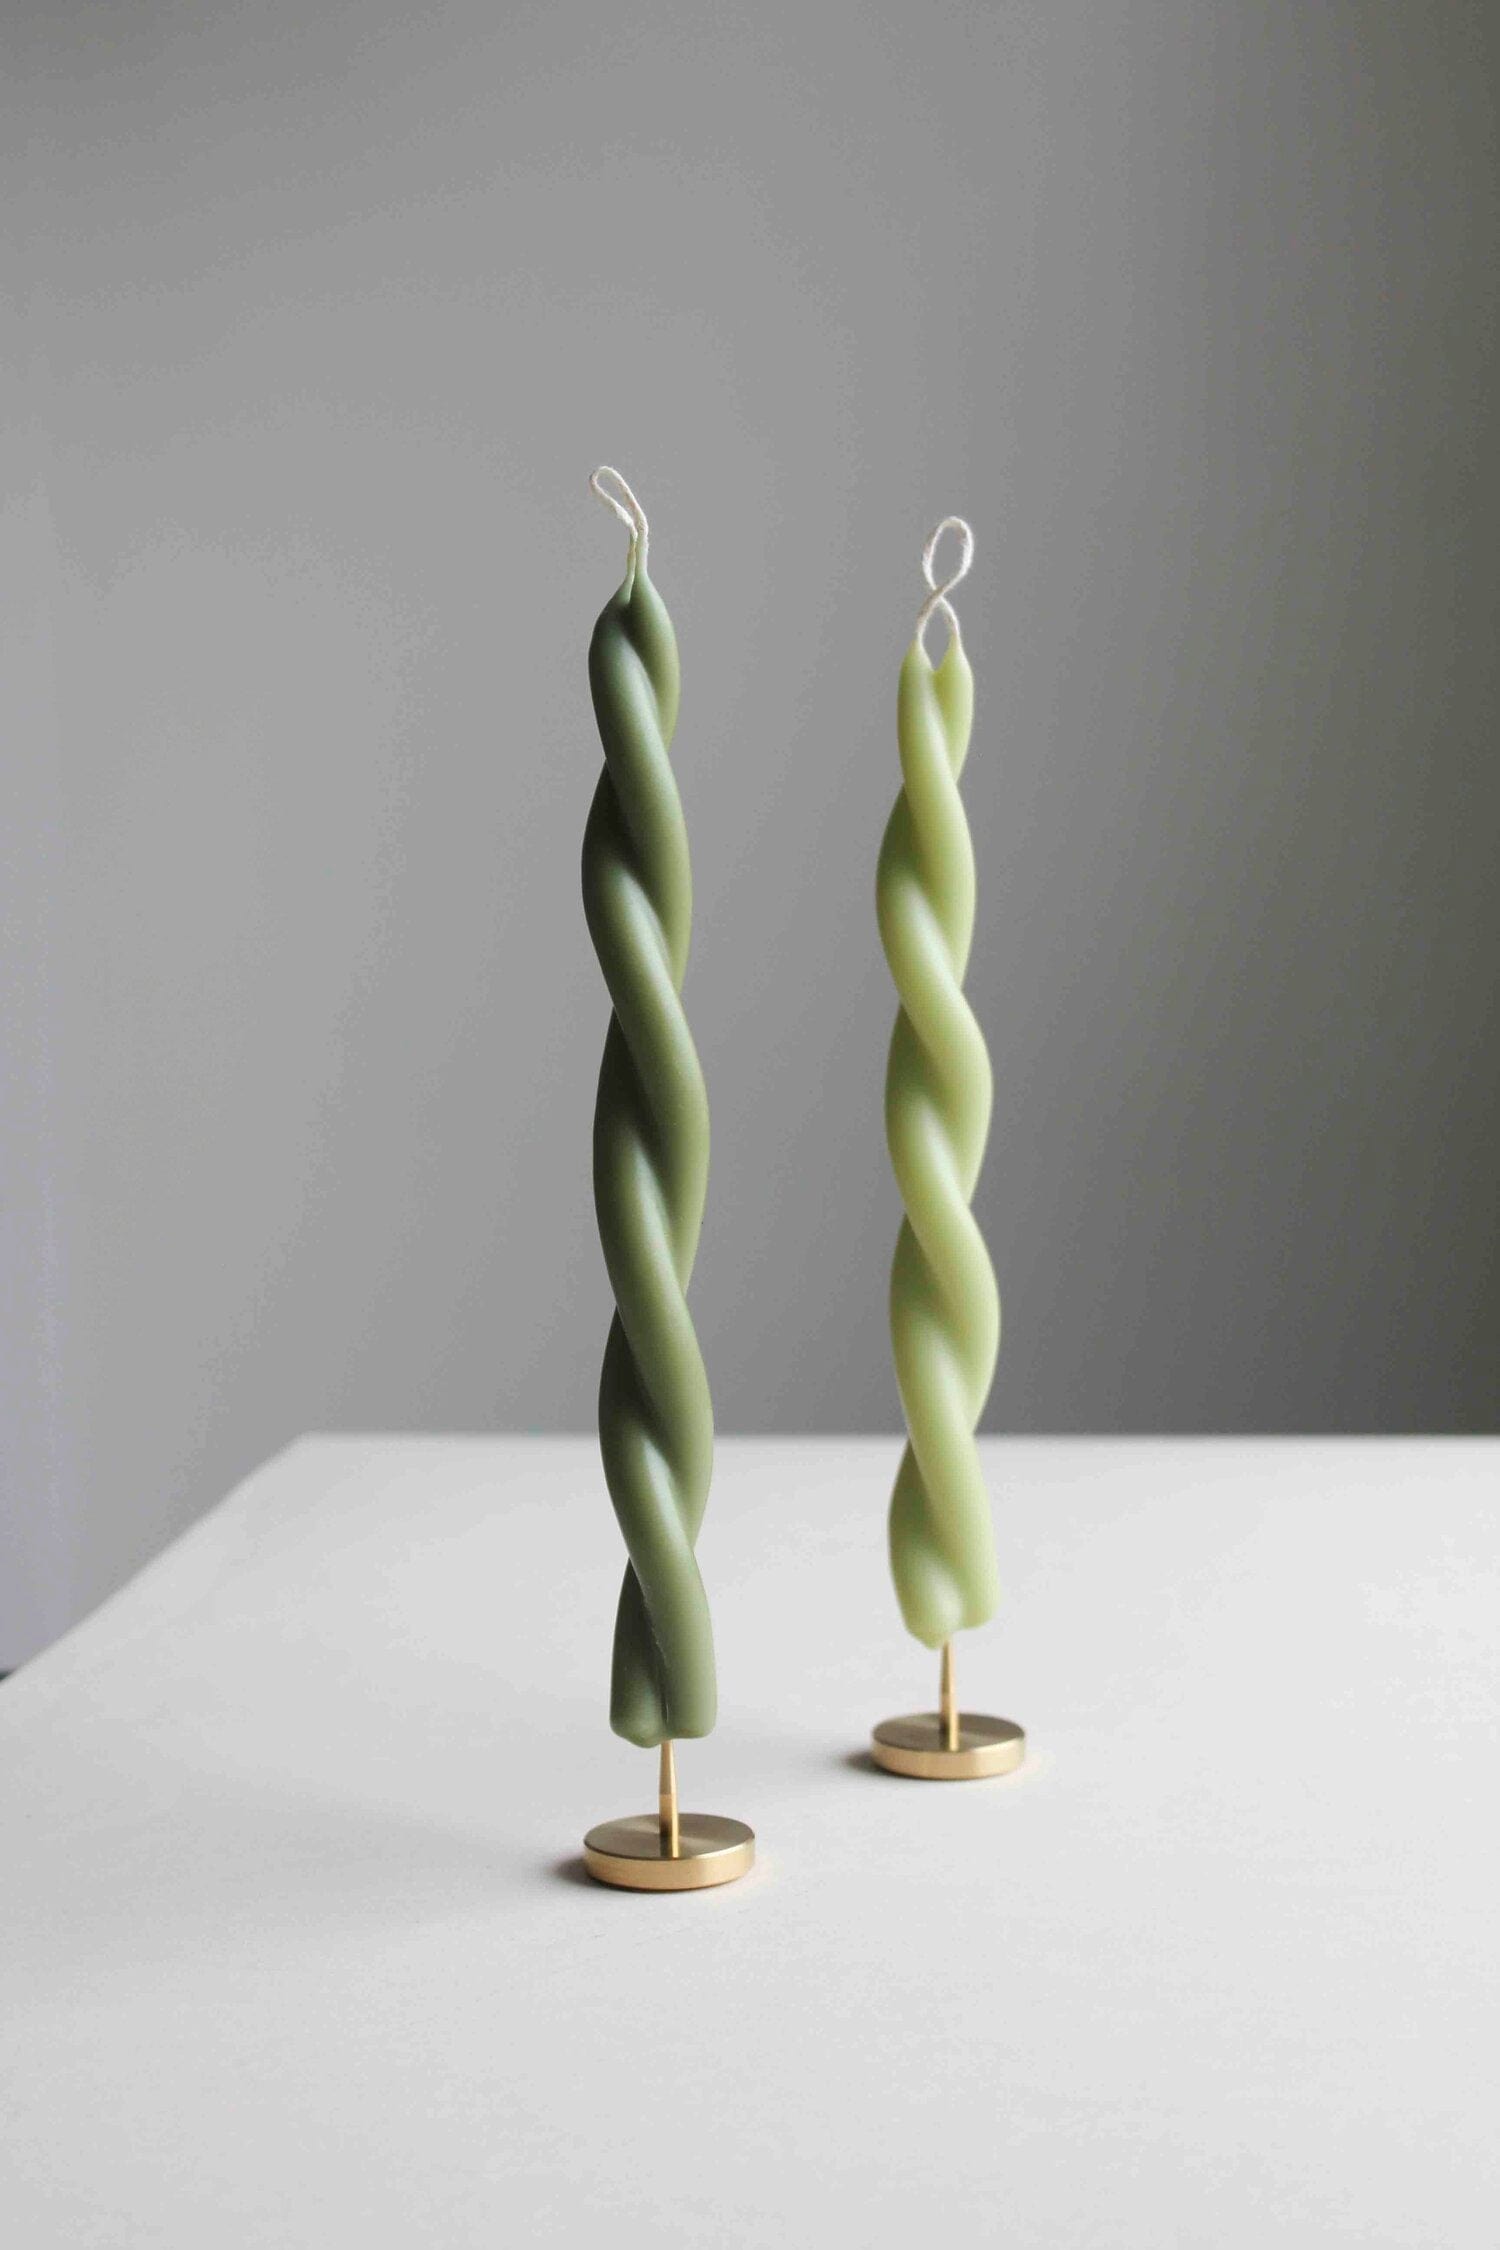 Wax Atelier Candles Hand Dipped Beeswax Candles in 'Laurel' - 2 styles available